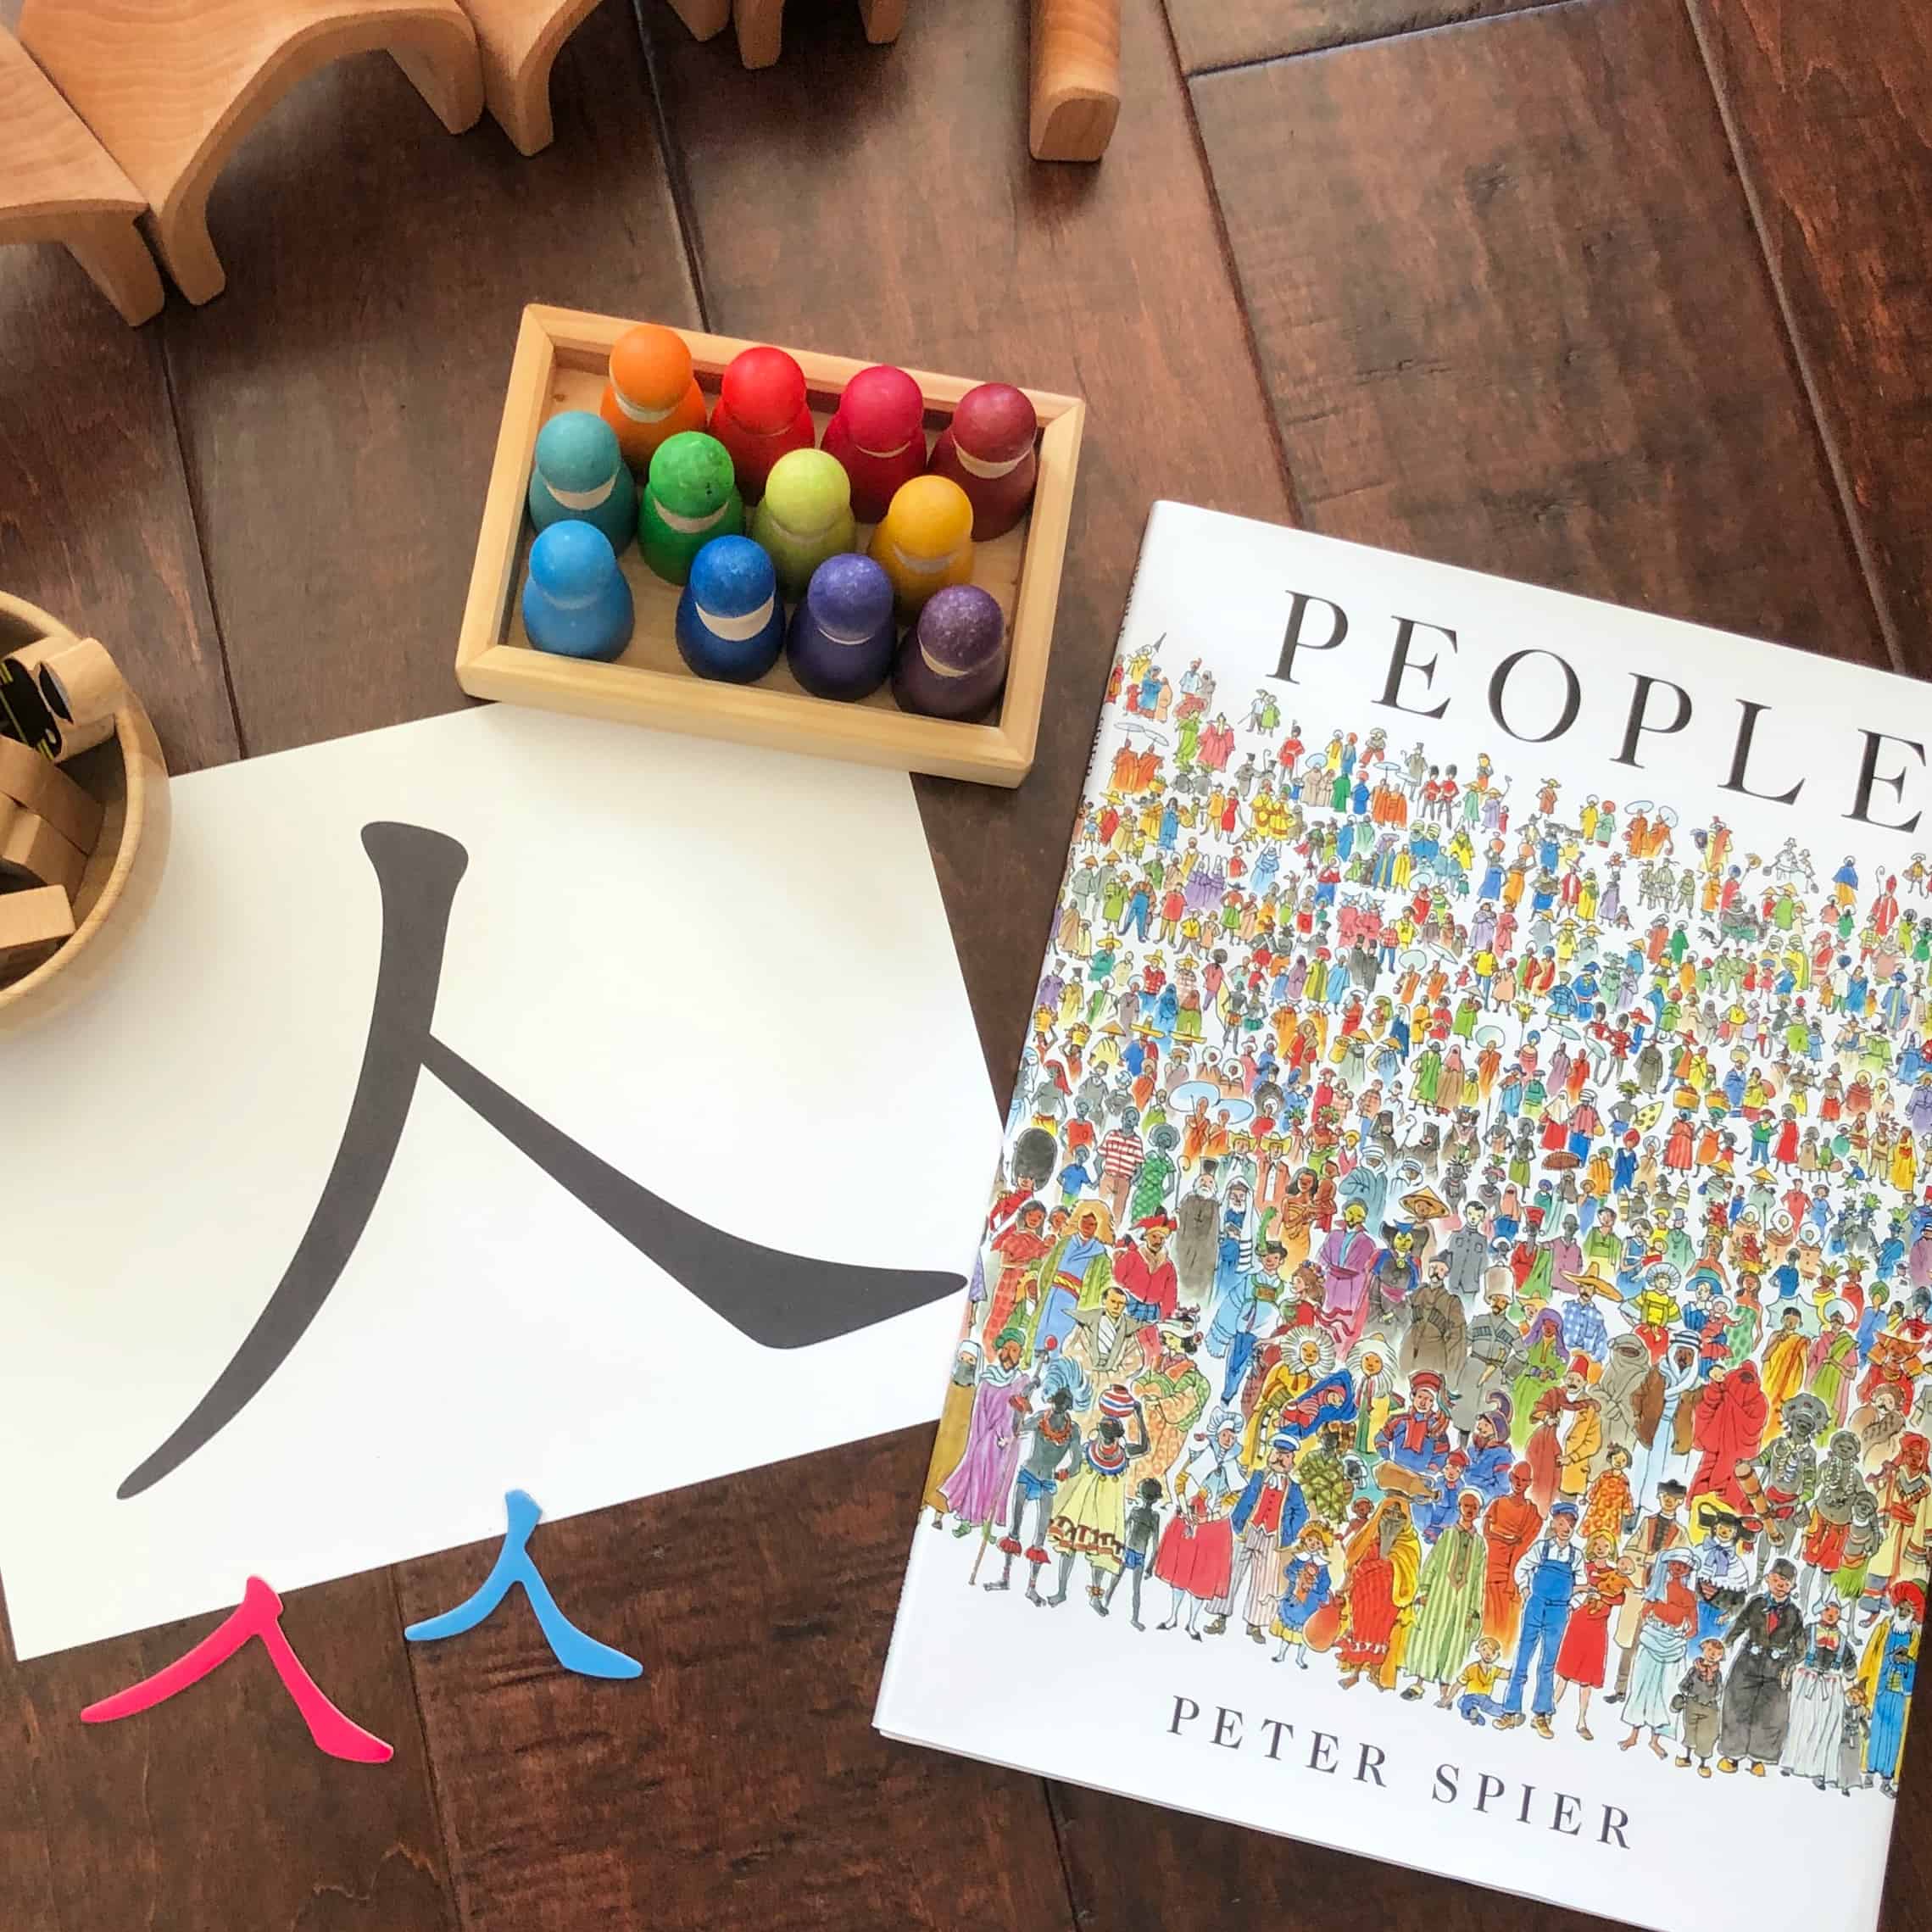 People by Peter Spier – Book Review and 人 Chinese Character Learning Activities